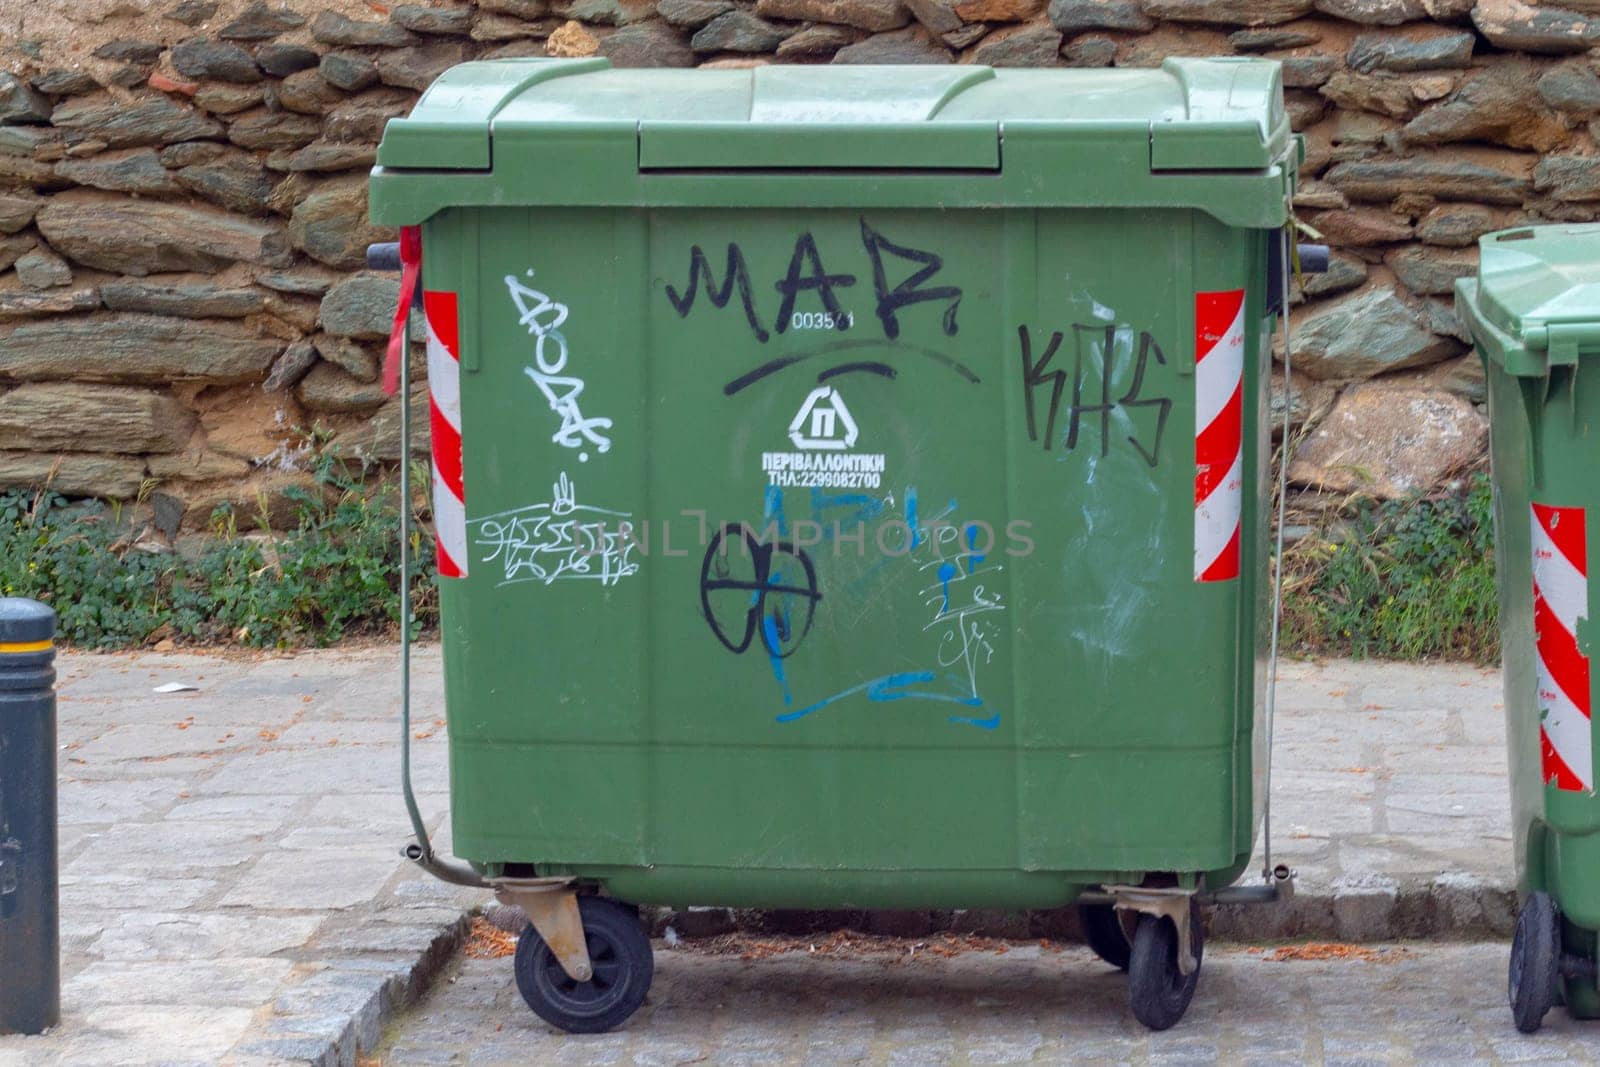 The green trash bin serves as a sustainable solution for urban waste disposal, promoting environmental consciousness and cleanliness in city environments